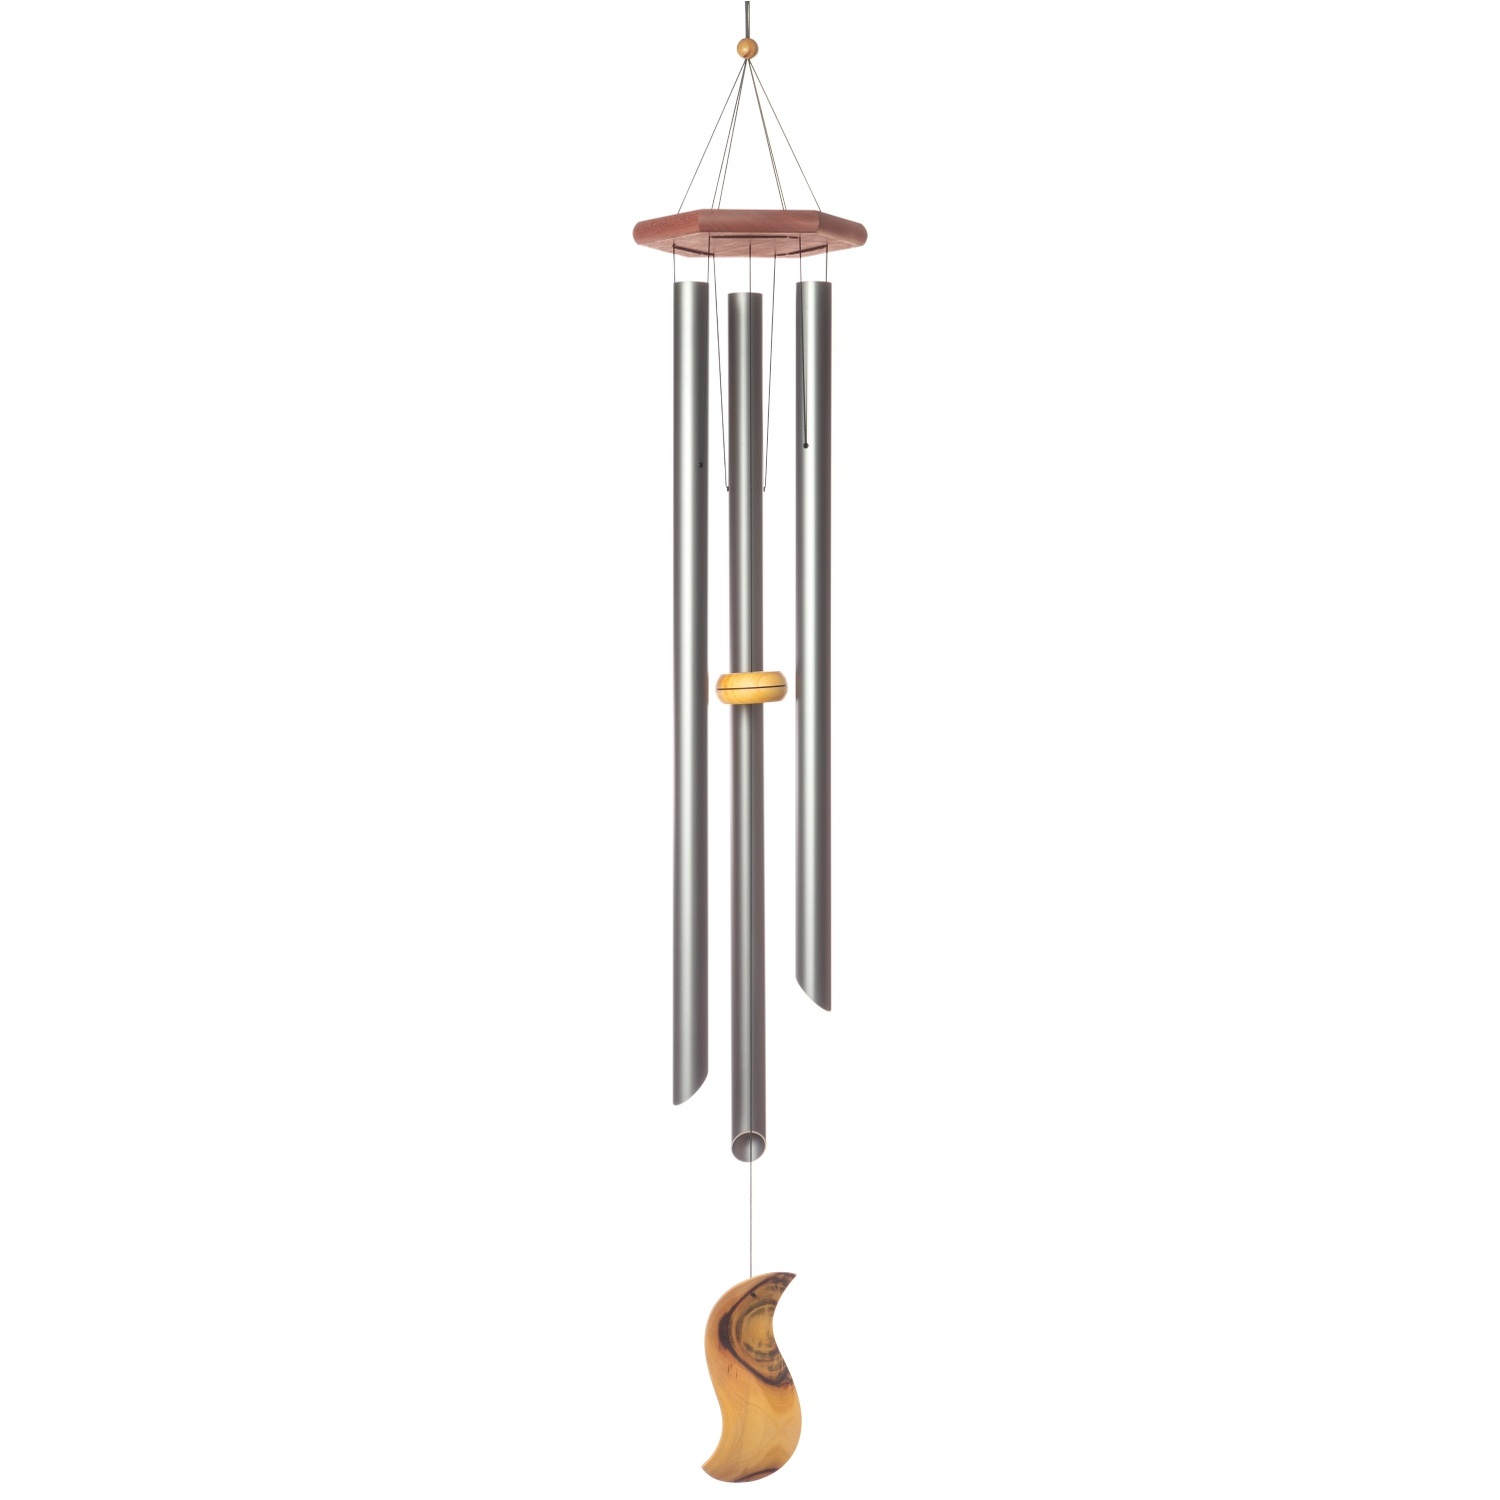 Extra large gunmetal Abbey 3 wind chime with handmade blue gum top and 3 polished organ fluted pipe ends